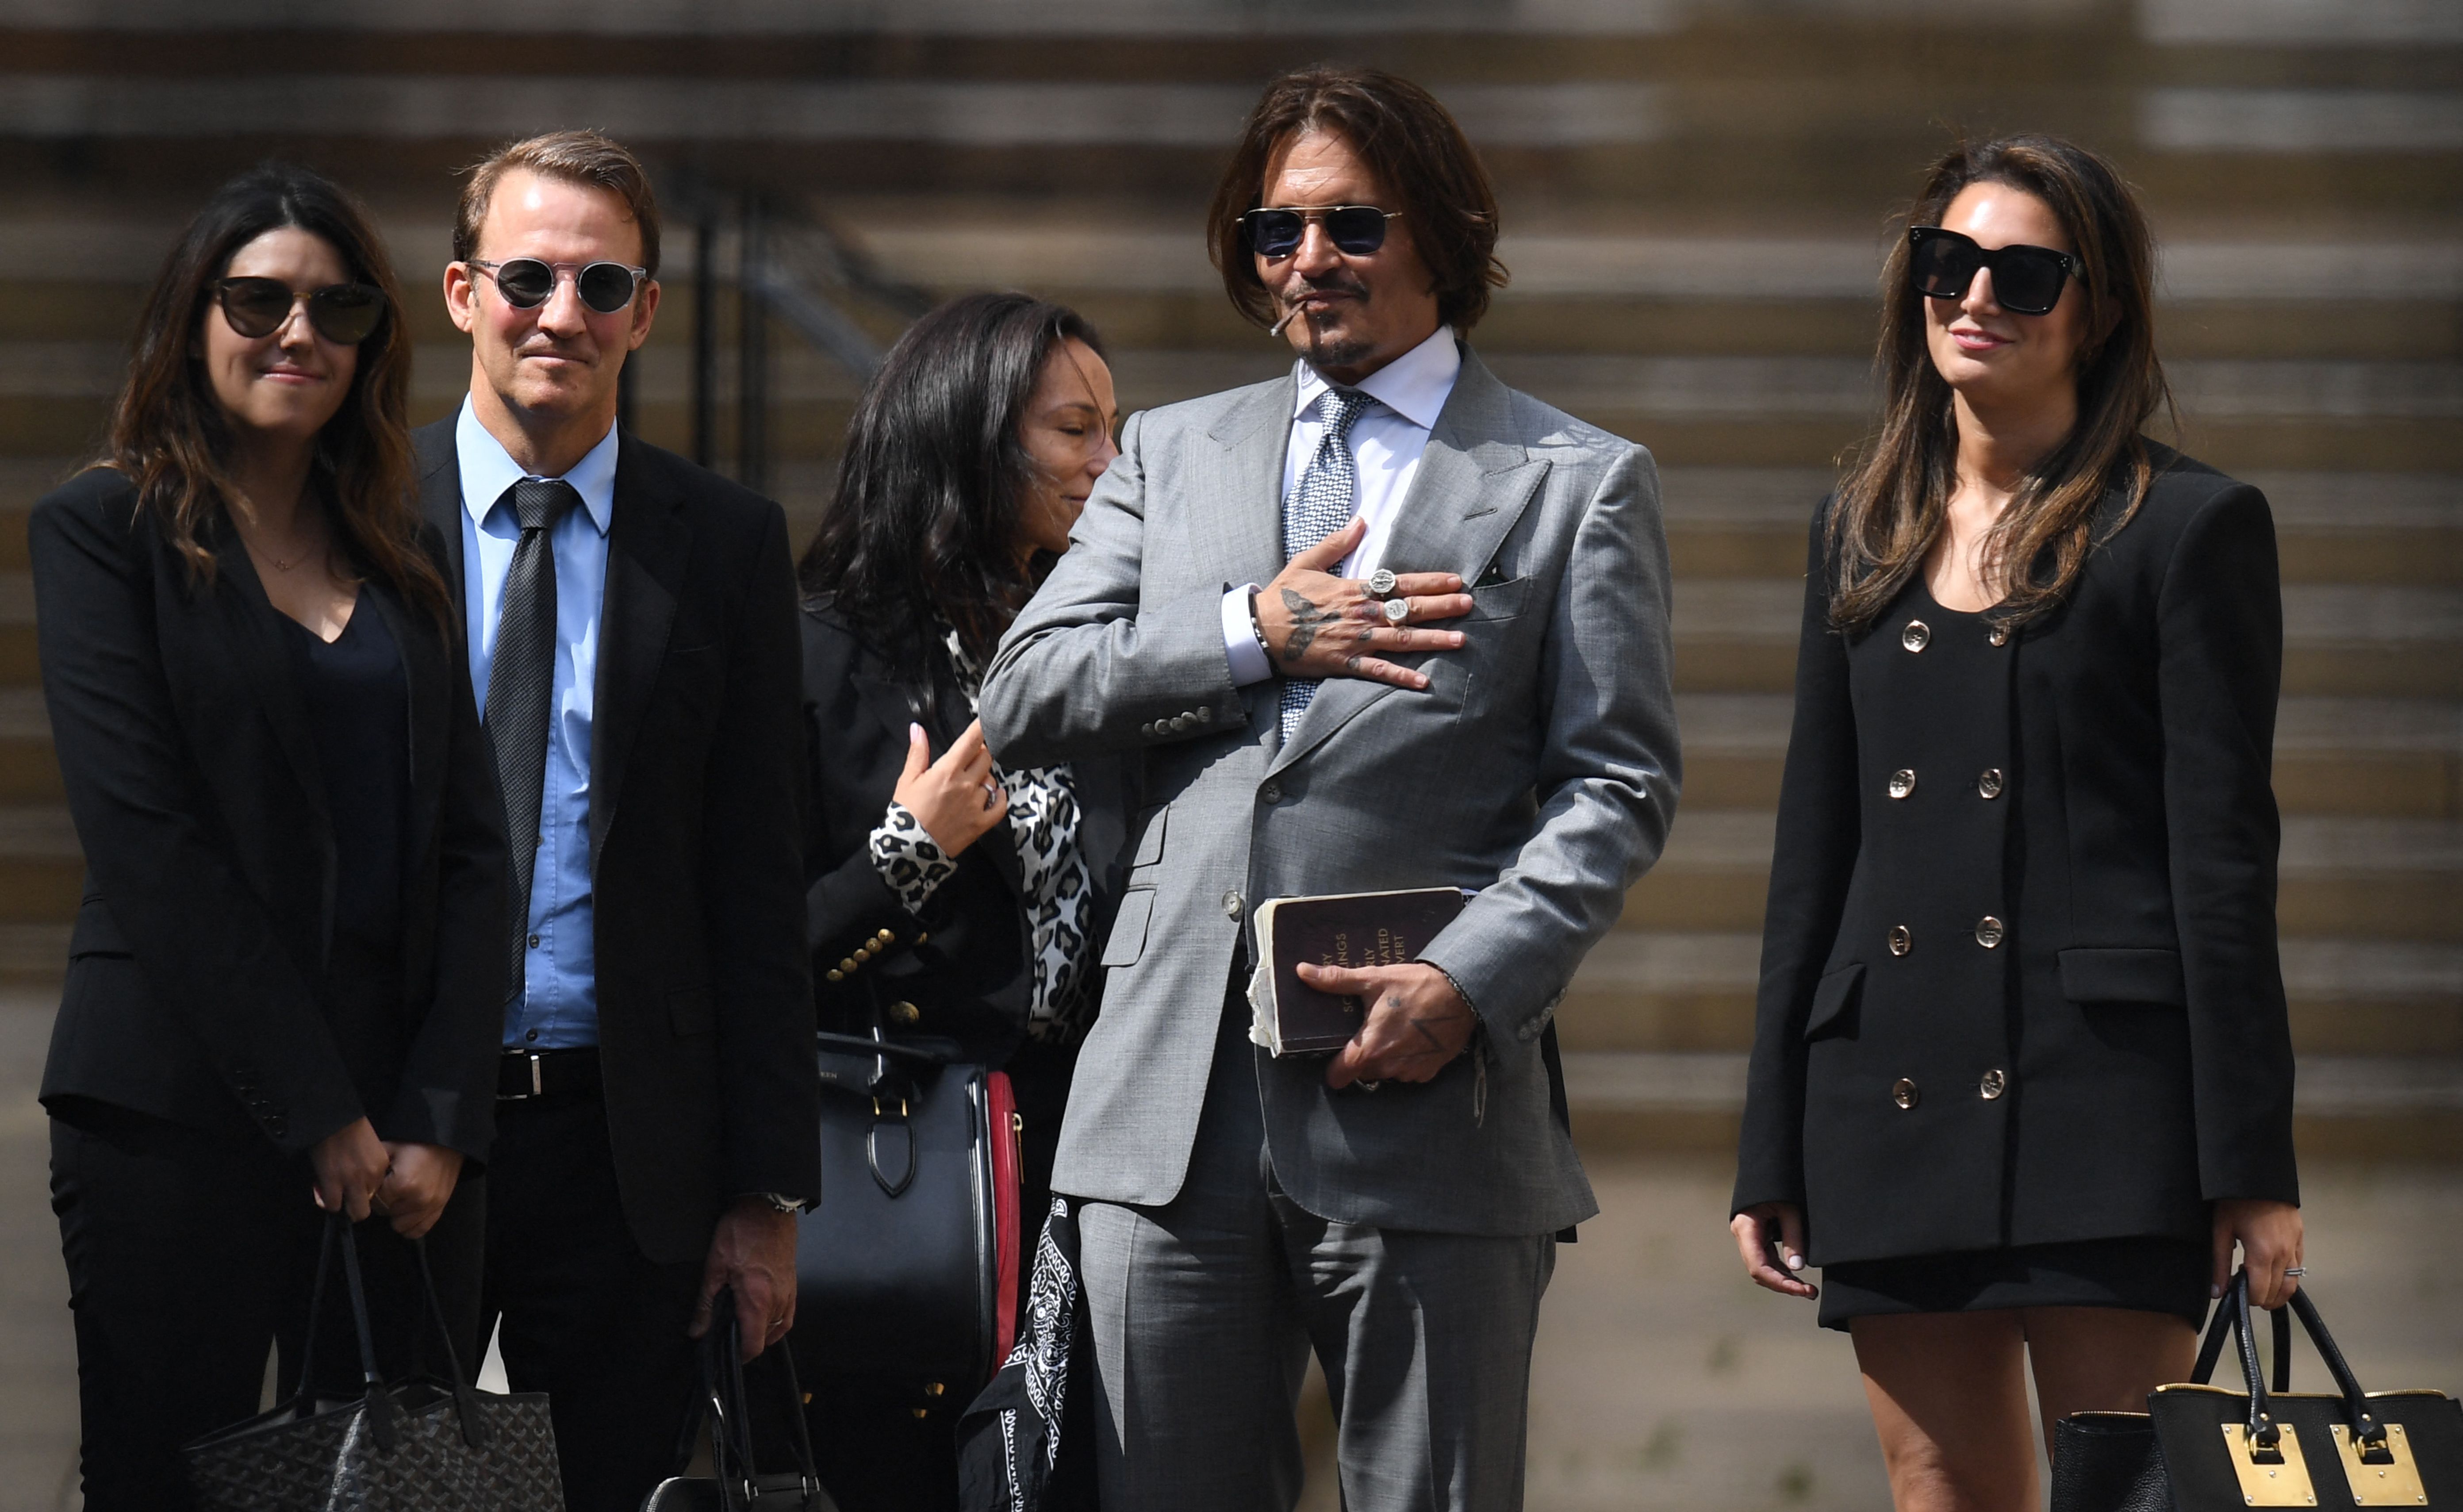 Johnny Depp photographed with his legal team at the High Court on July 16, 2020 in London | Source: Getty Images